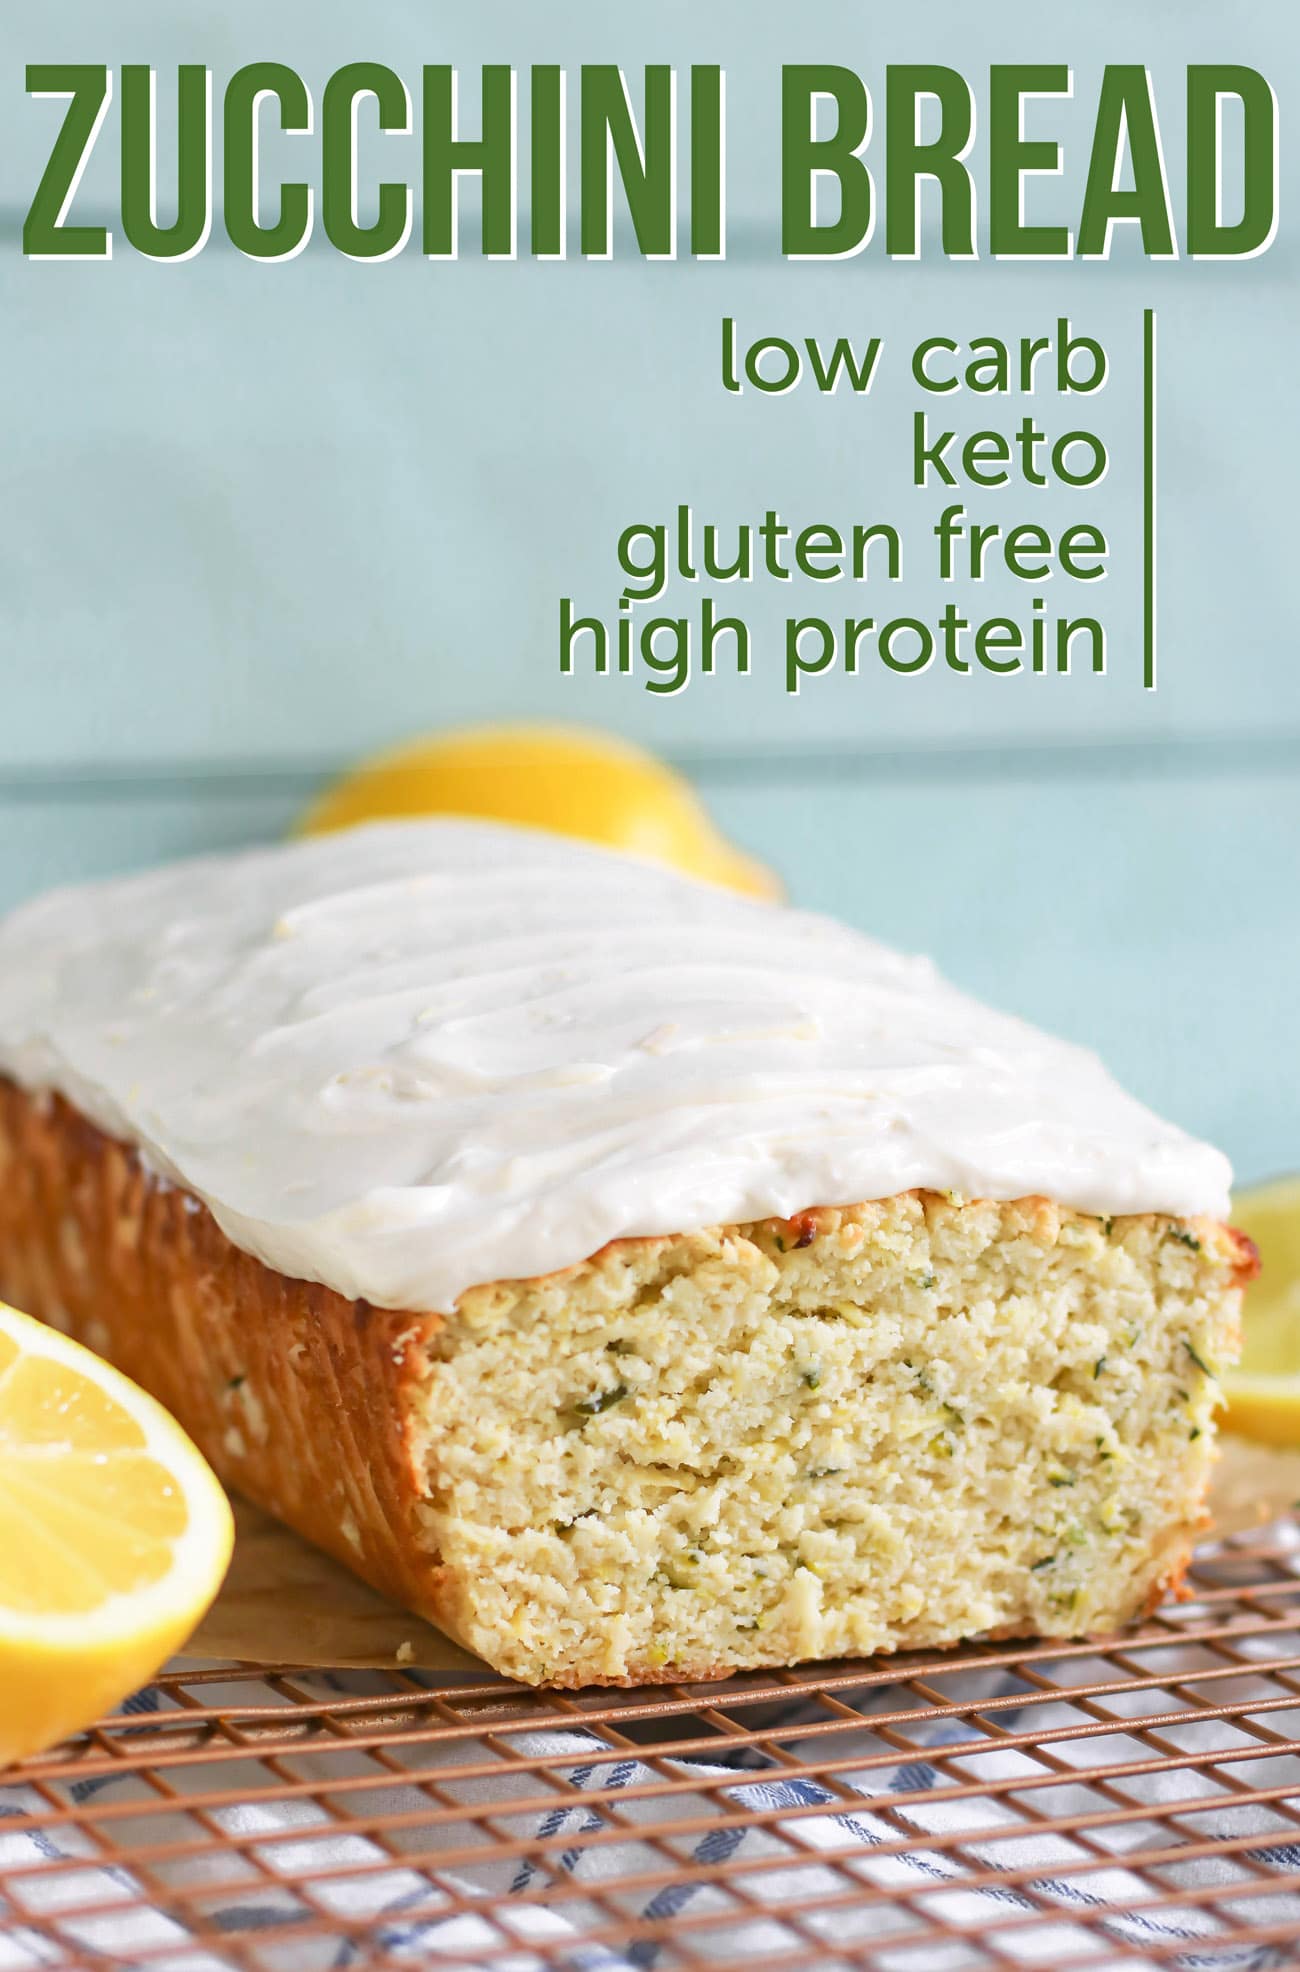 This low-carb and gluten-free Zucchini Bread is super easy to make and uses simple ingredients, such as coconut flour — a paleo, keto-friendly, gluten-free flour — and Greek yogurt — which is sugar free and high protein! It’s soft and moist, just like Banana Bread, but contains a vegetable you can’t taste! If you grow your own zucchini, or are looking for new recipes using zucchini, you’ve gotta give this healthy Zucchini Bread recipe a try!